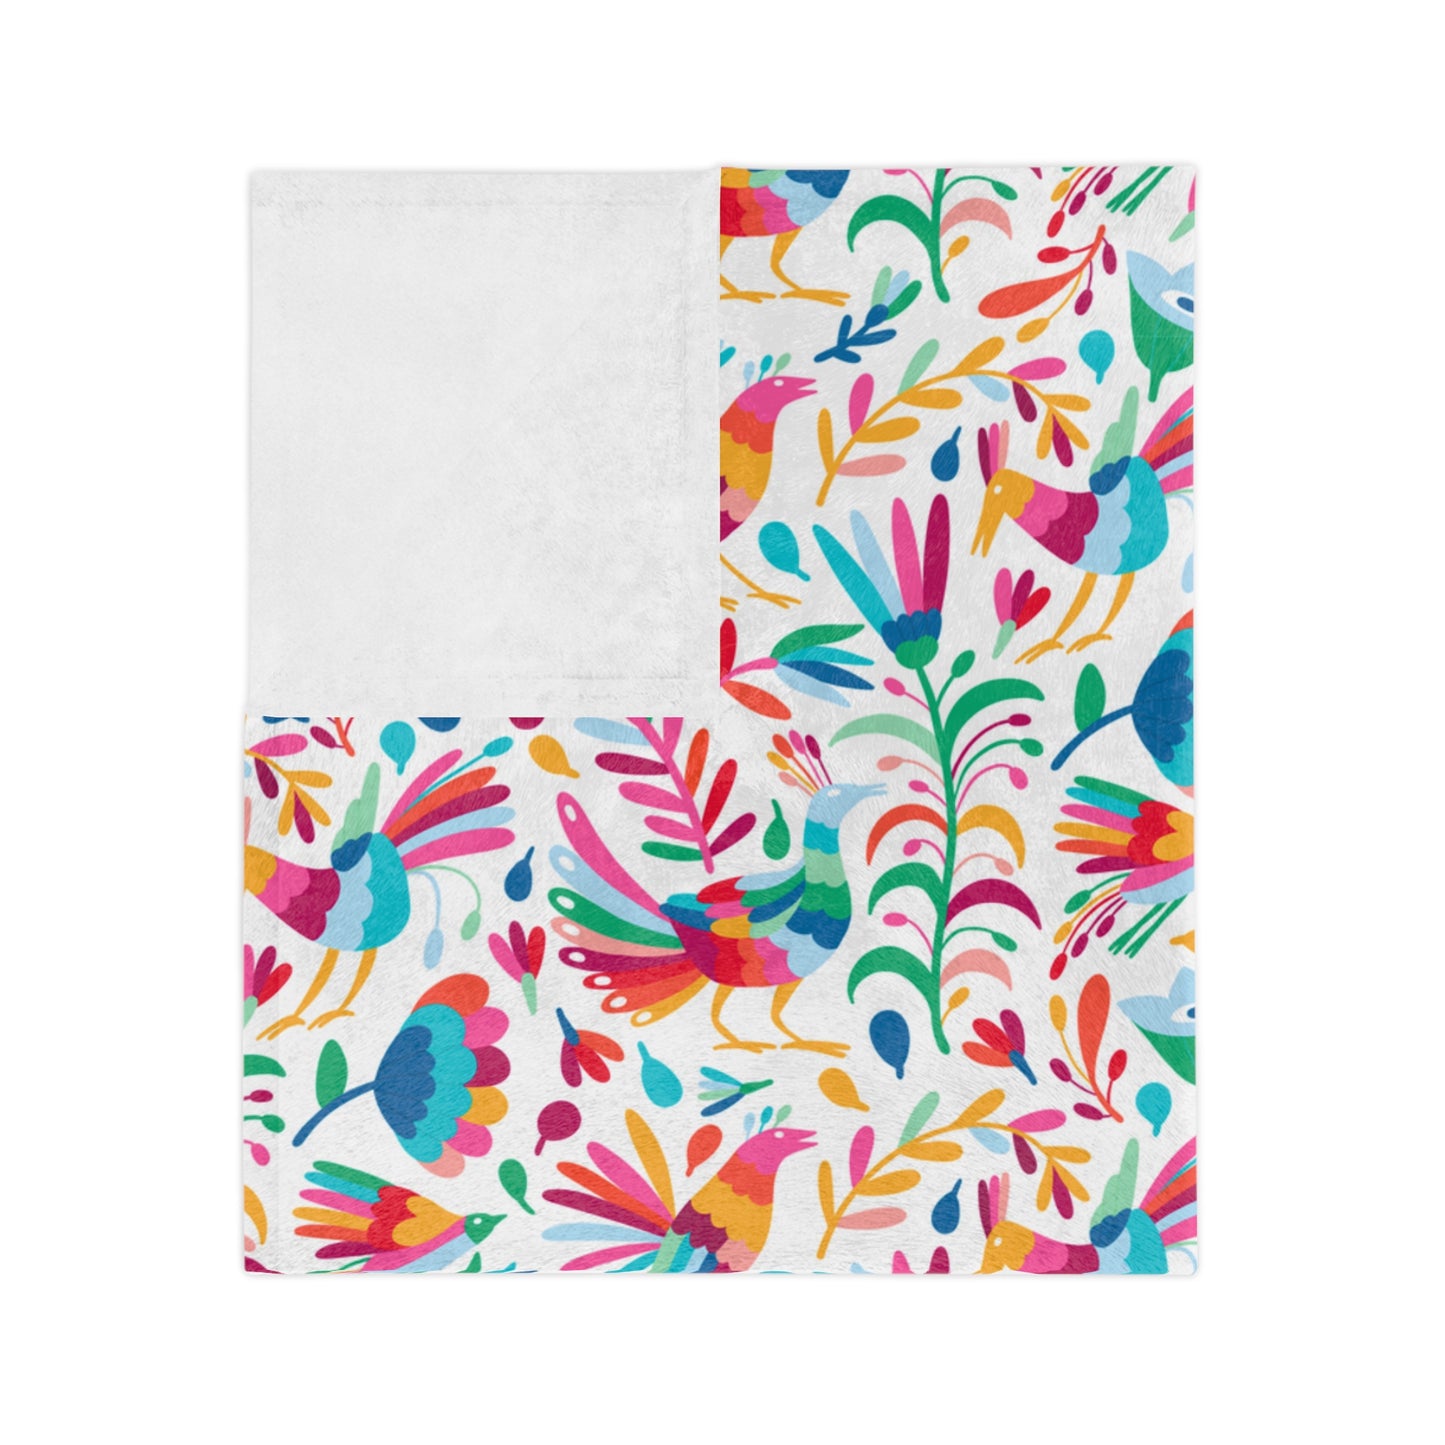 Otomi print  Blanket for Mexican home decor. Birthday gift for Mexican mom, Mexican friend or tia.